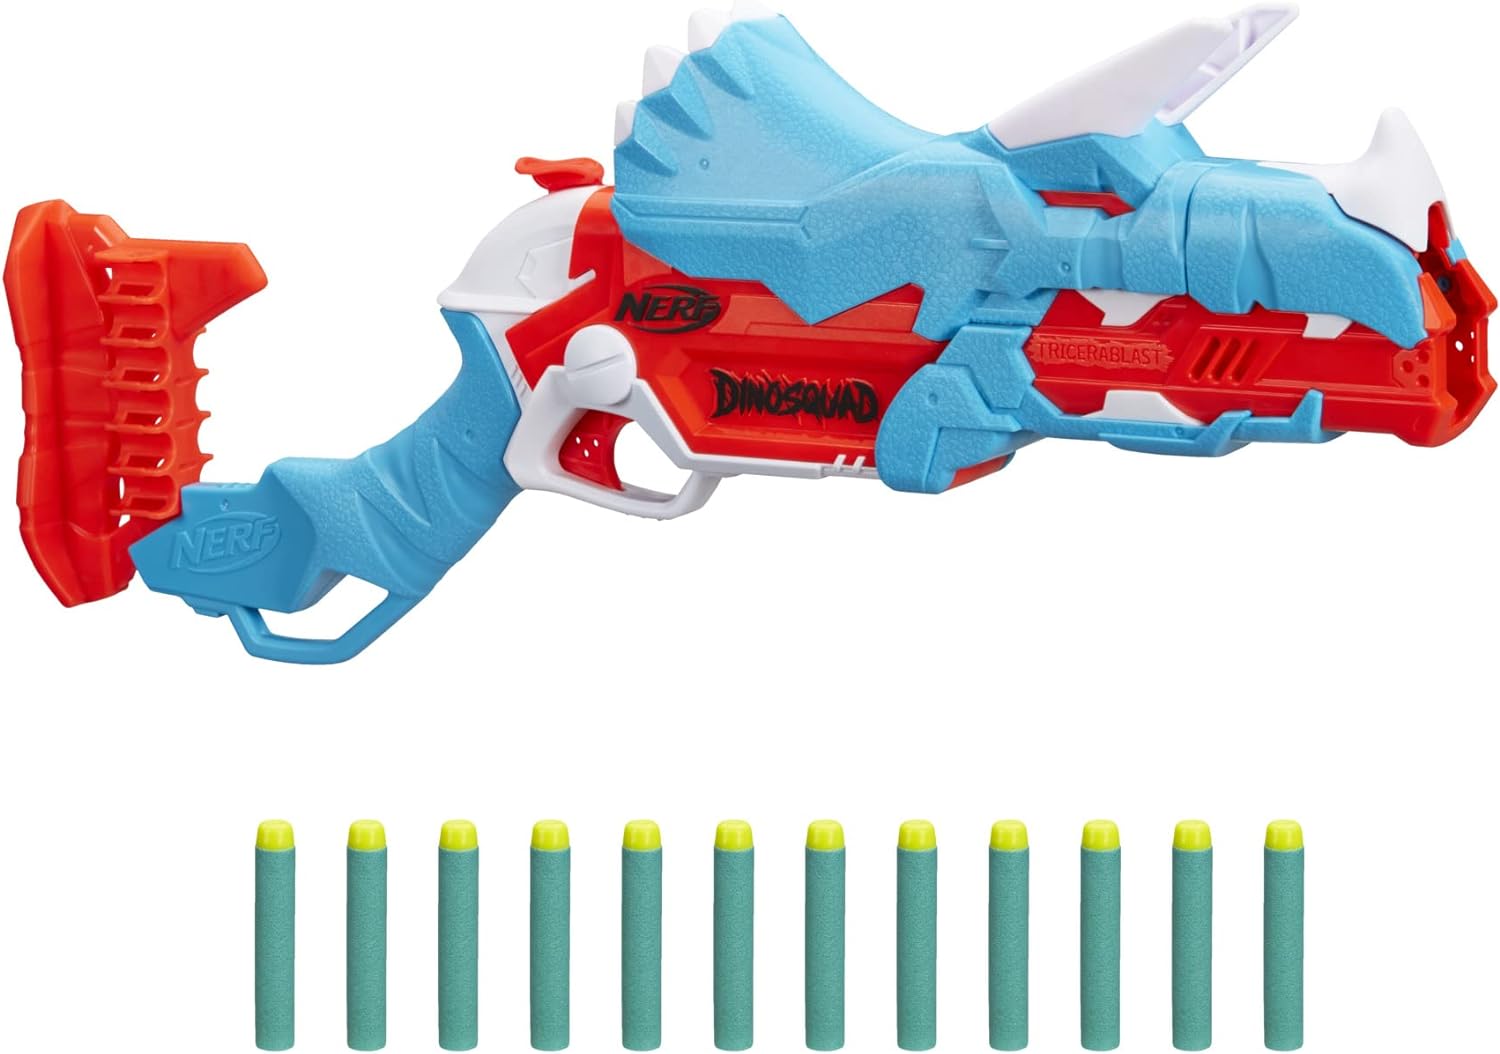 My Nerf armory begins and ends with the entire DinoSquad blaster line-up. In this review, I'm going to share some objective facts about the Tricera-Blast along with my opinion on how it performs and operates with adults and my 2 young children (ages 3 and 5), then compare it to the other DinoSquad blasters in the line-up.The Tricera-Blast is a break-action style rifle with a 3-dart capacity. To load, push down on the blaster' beak revealing the 3-dart chamber, then snap the action shut. An addi